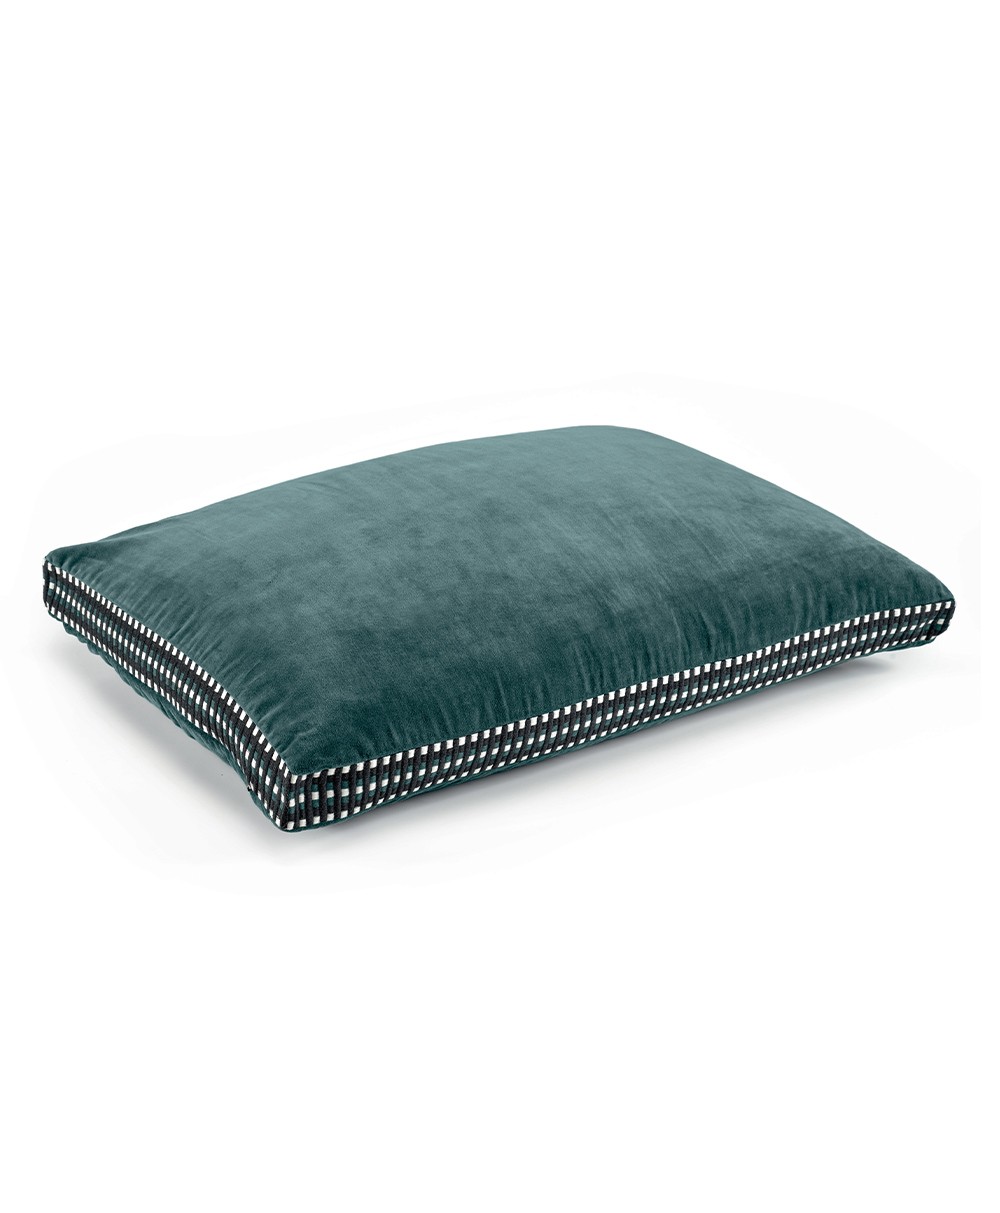 Velvet cushion Athena with piping finish from Élitis - order online ...